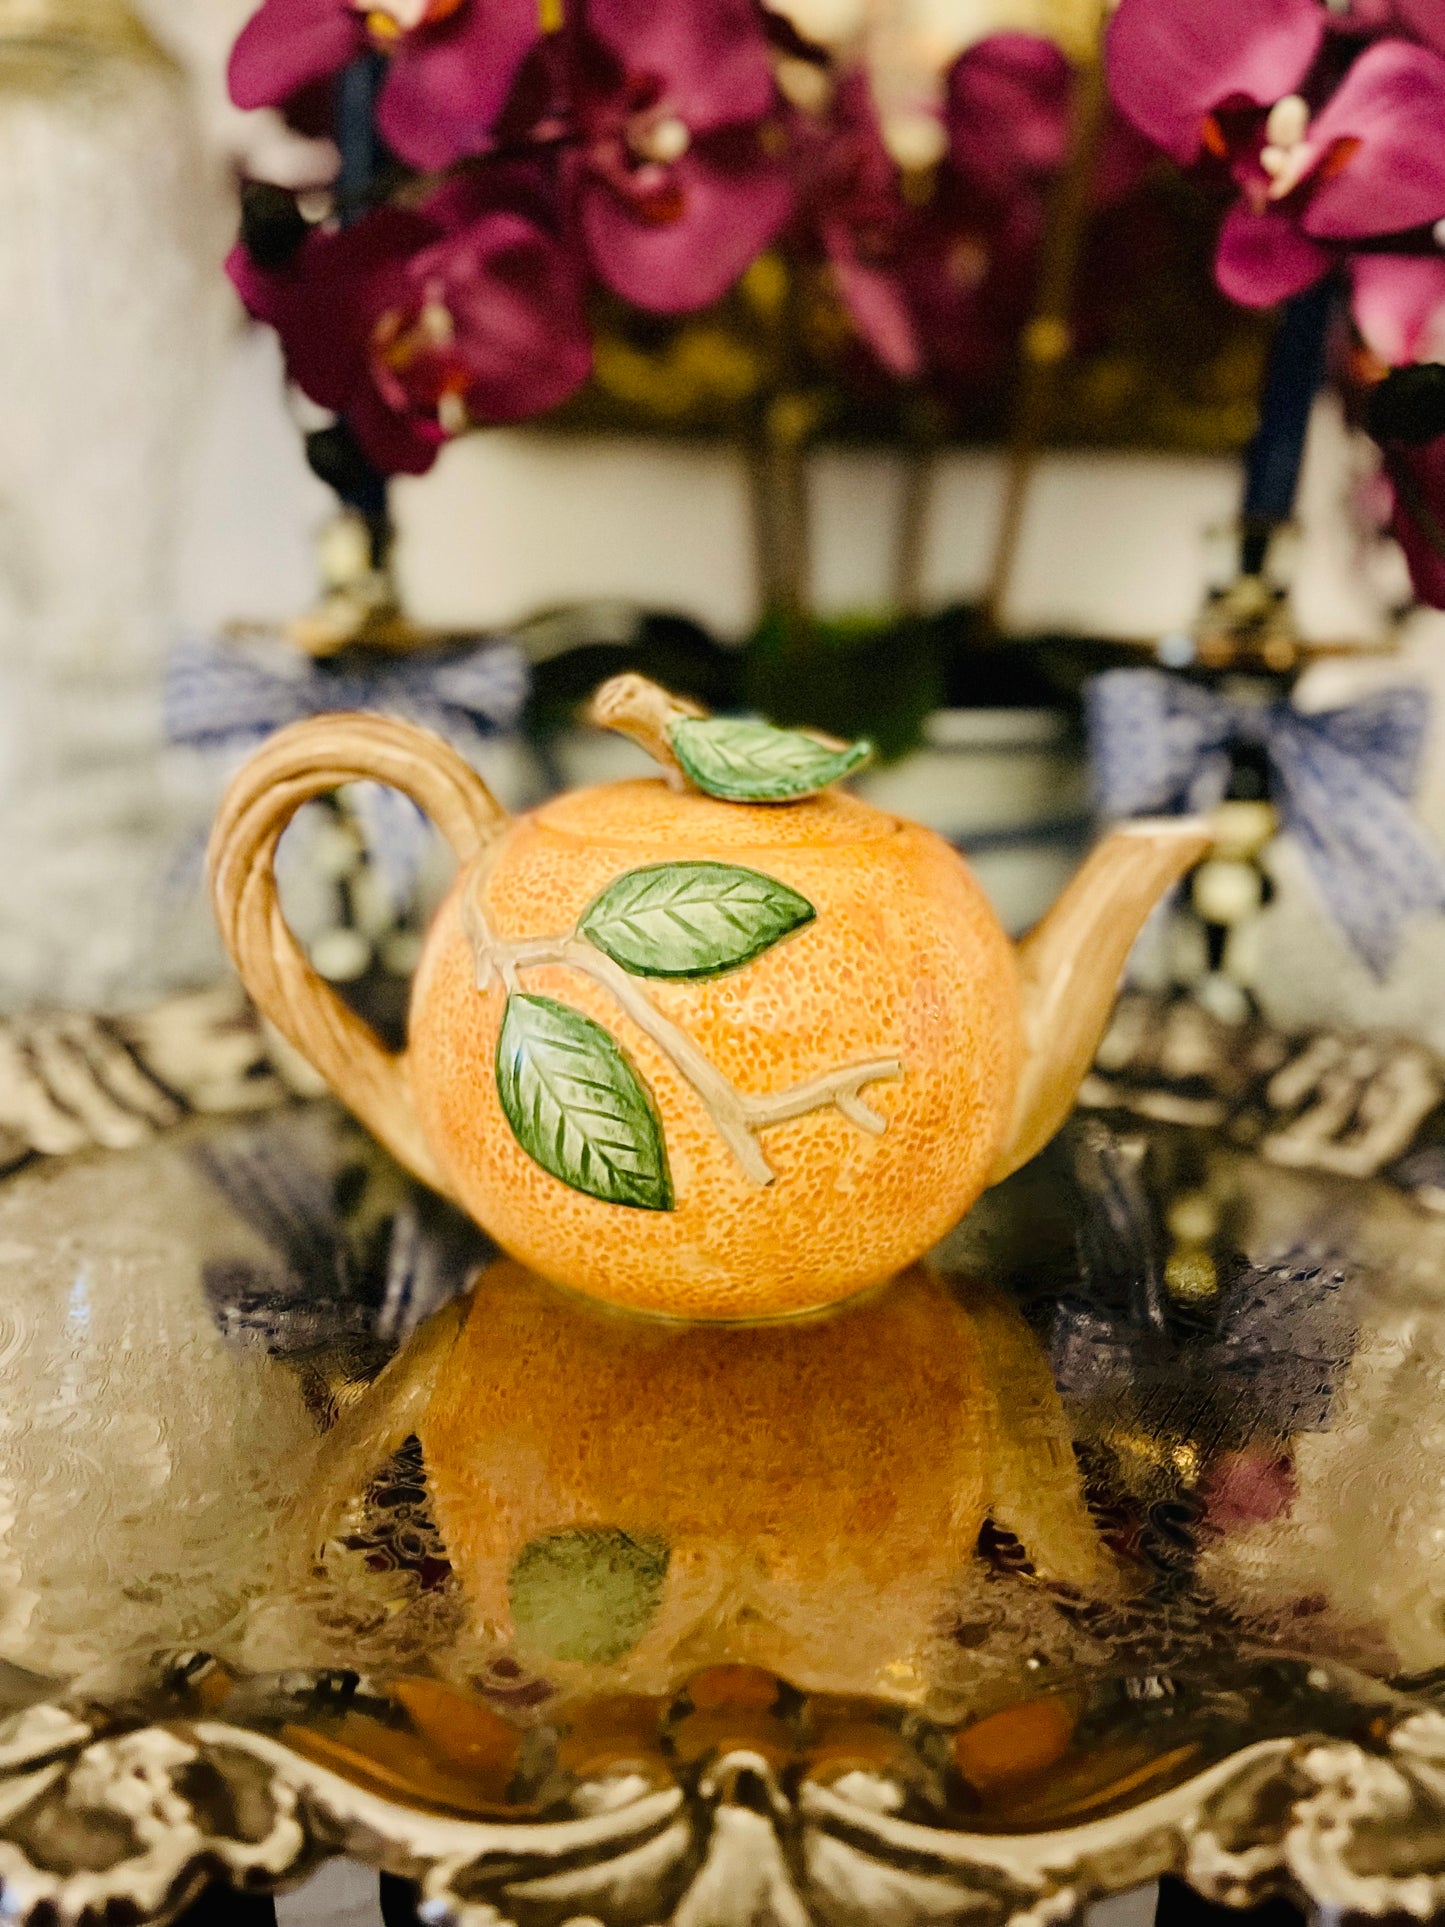 Fitz and Floyd Citrus Teapot, Orange with Branches and Leaves Citrus 1989 FF Teapot